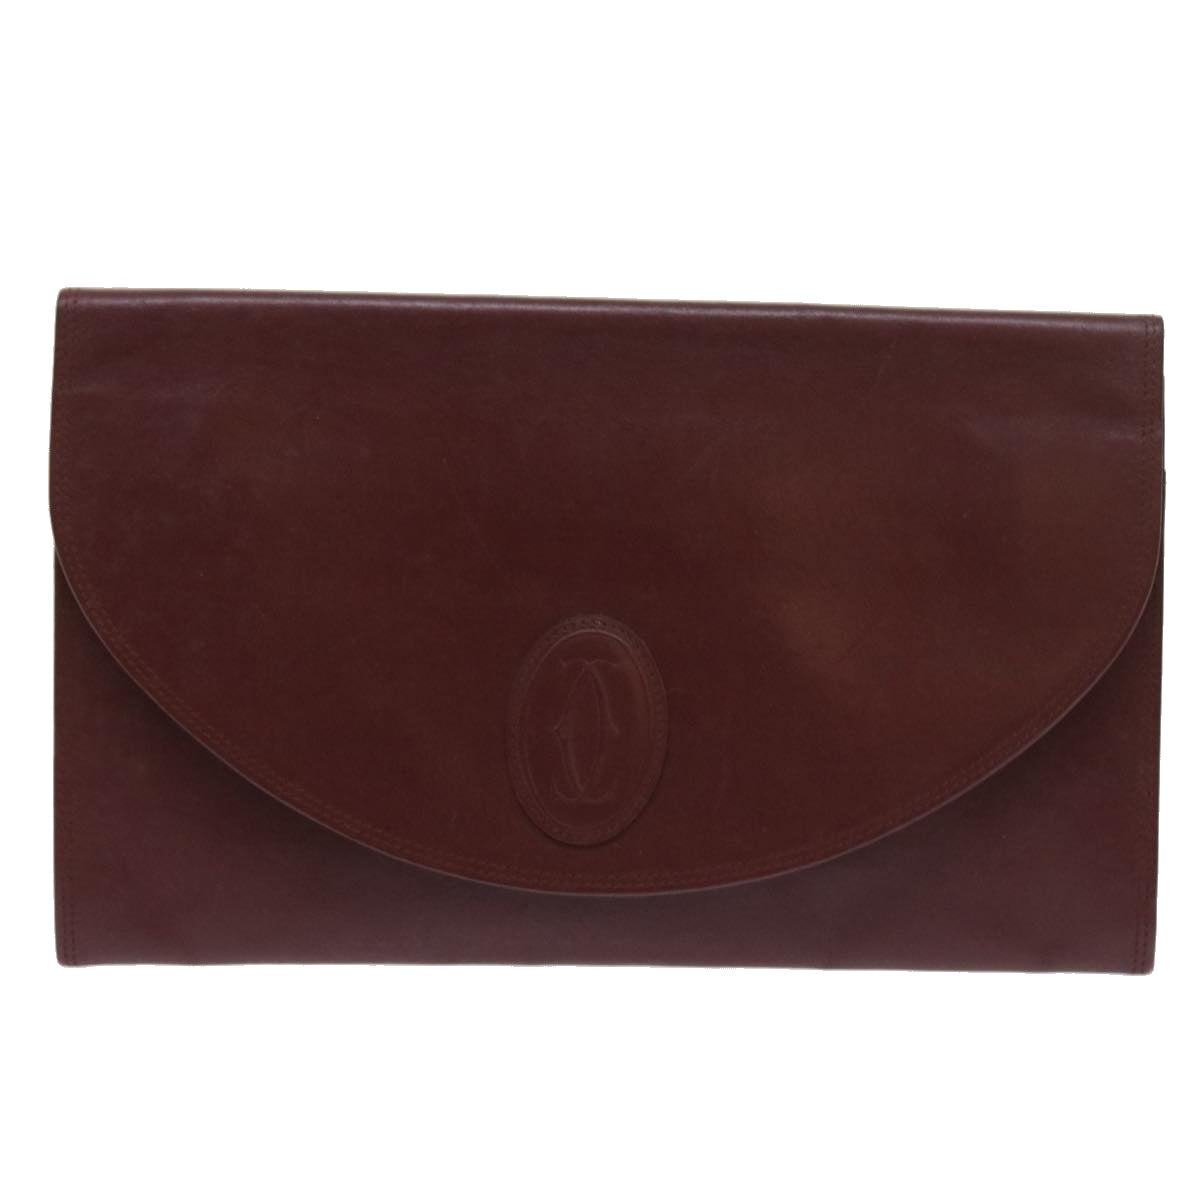 CARTIER Clutch Bag Leather Wine Red Auth ac2250